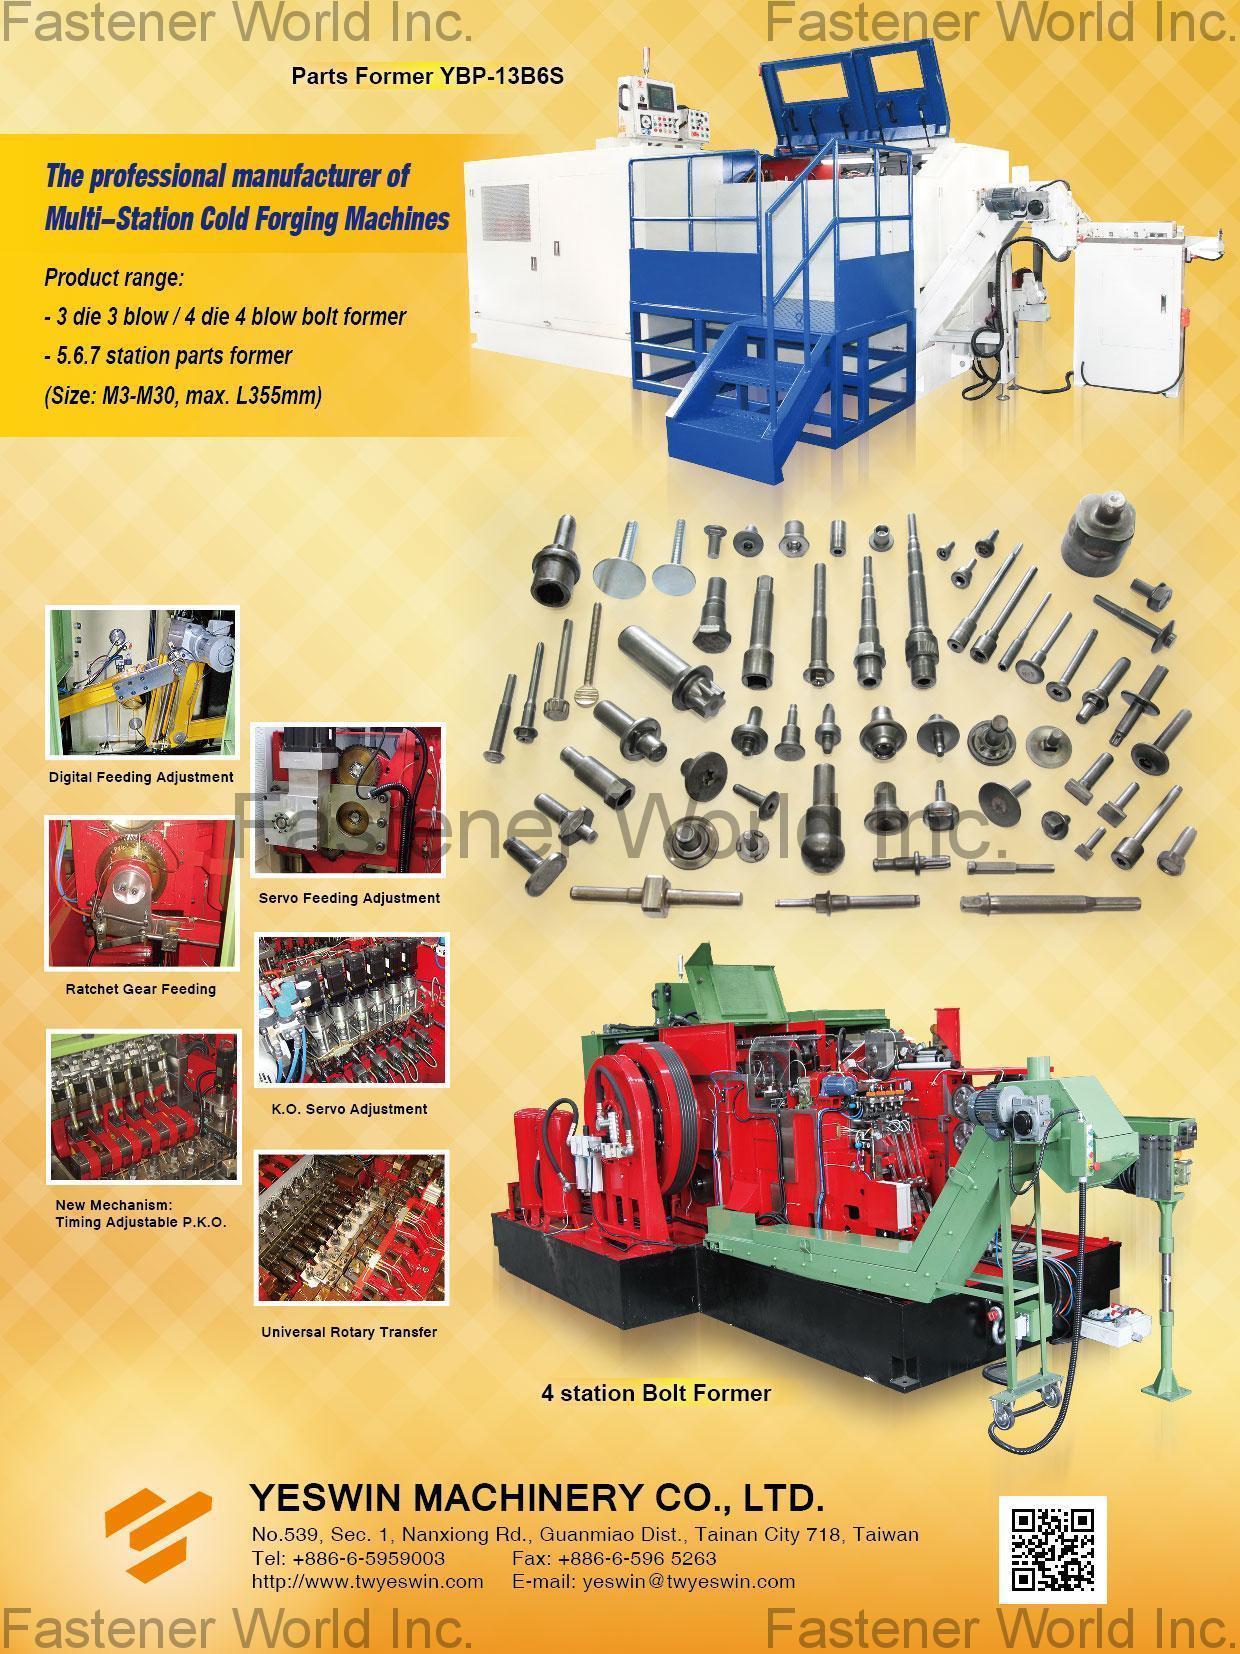 YESWIN MACHINERY CO., LTD. , Bolt Formers, Cold Forging Machines, Multi-station Parts formers, Forming Machines for Fasteners , Cold Header